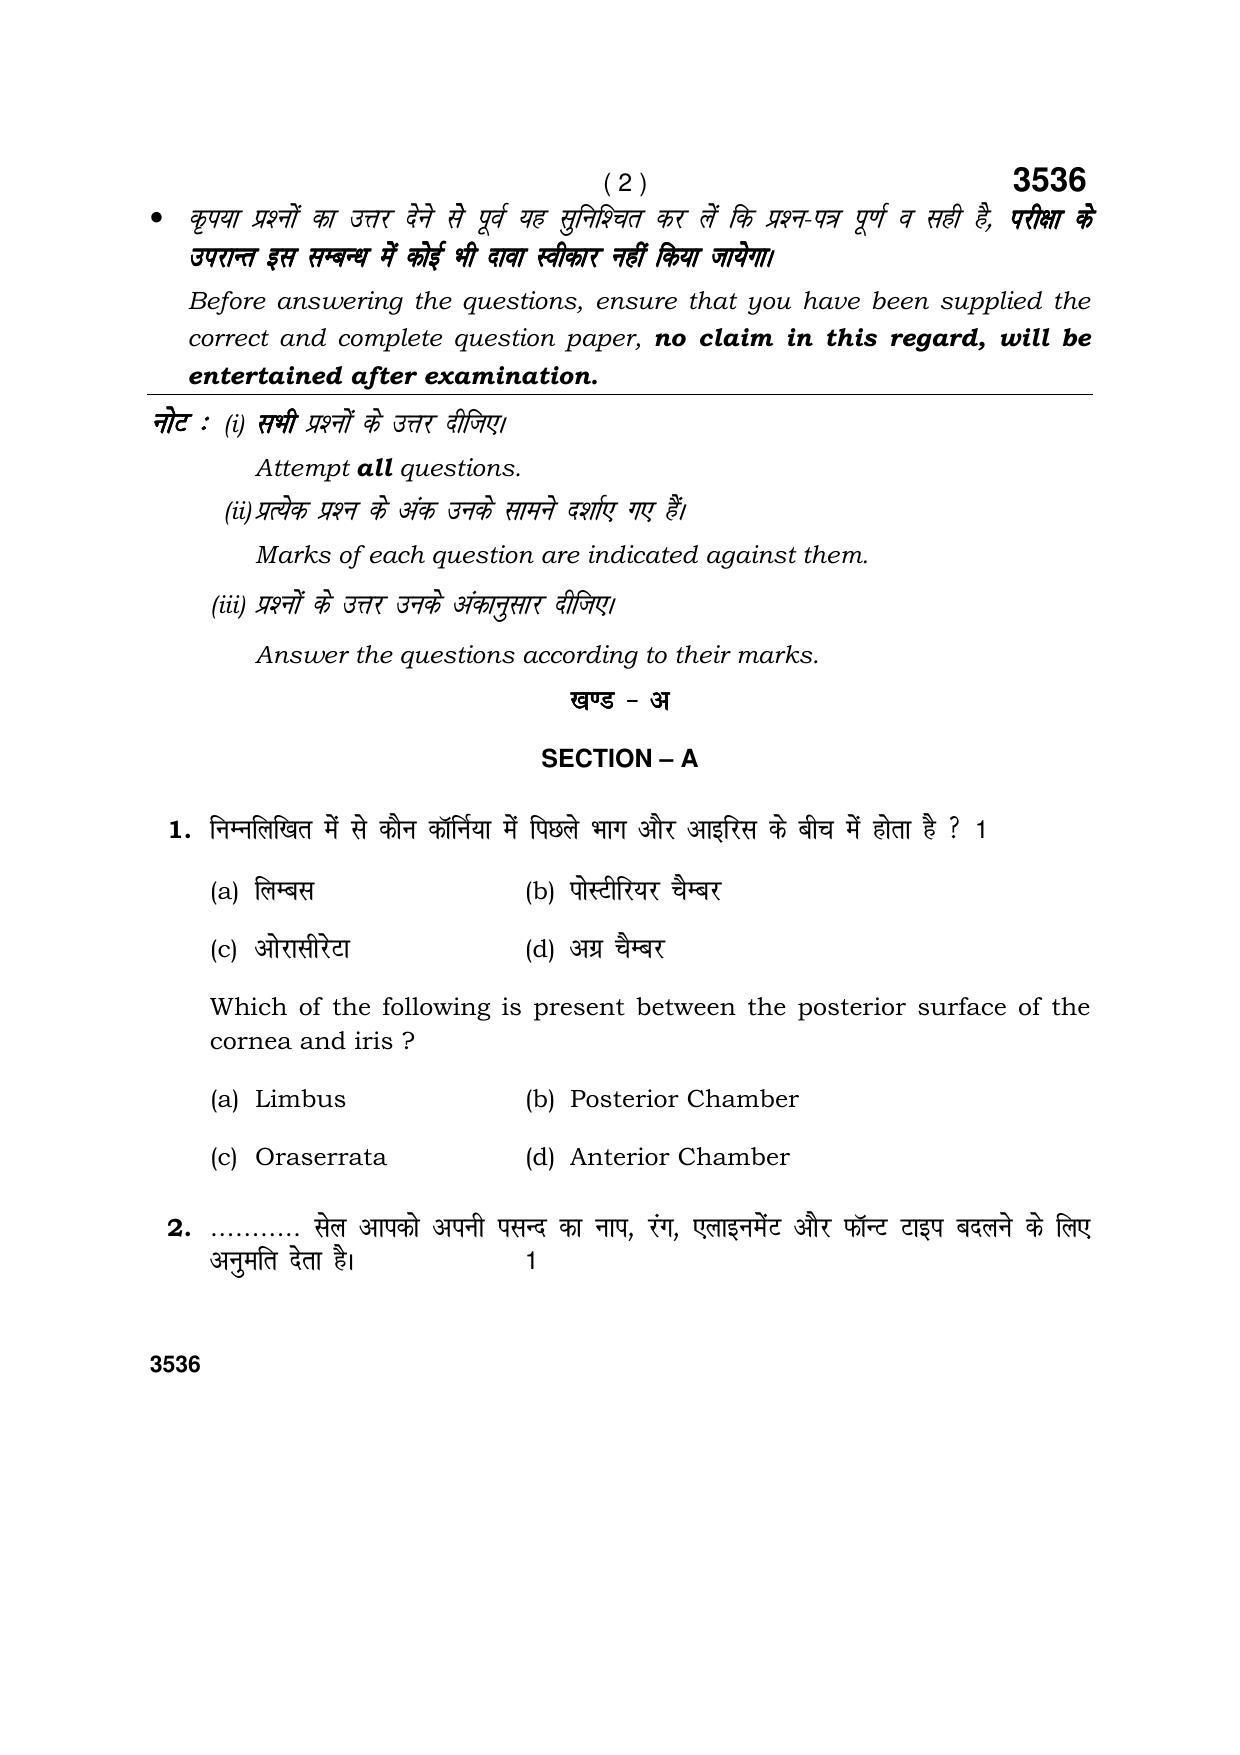 Haryana Board HBSE Class 10 Vision Technician 2018 Question Paper - Page 2